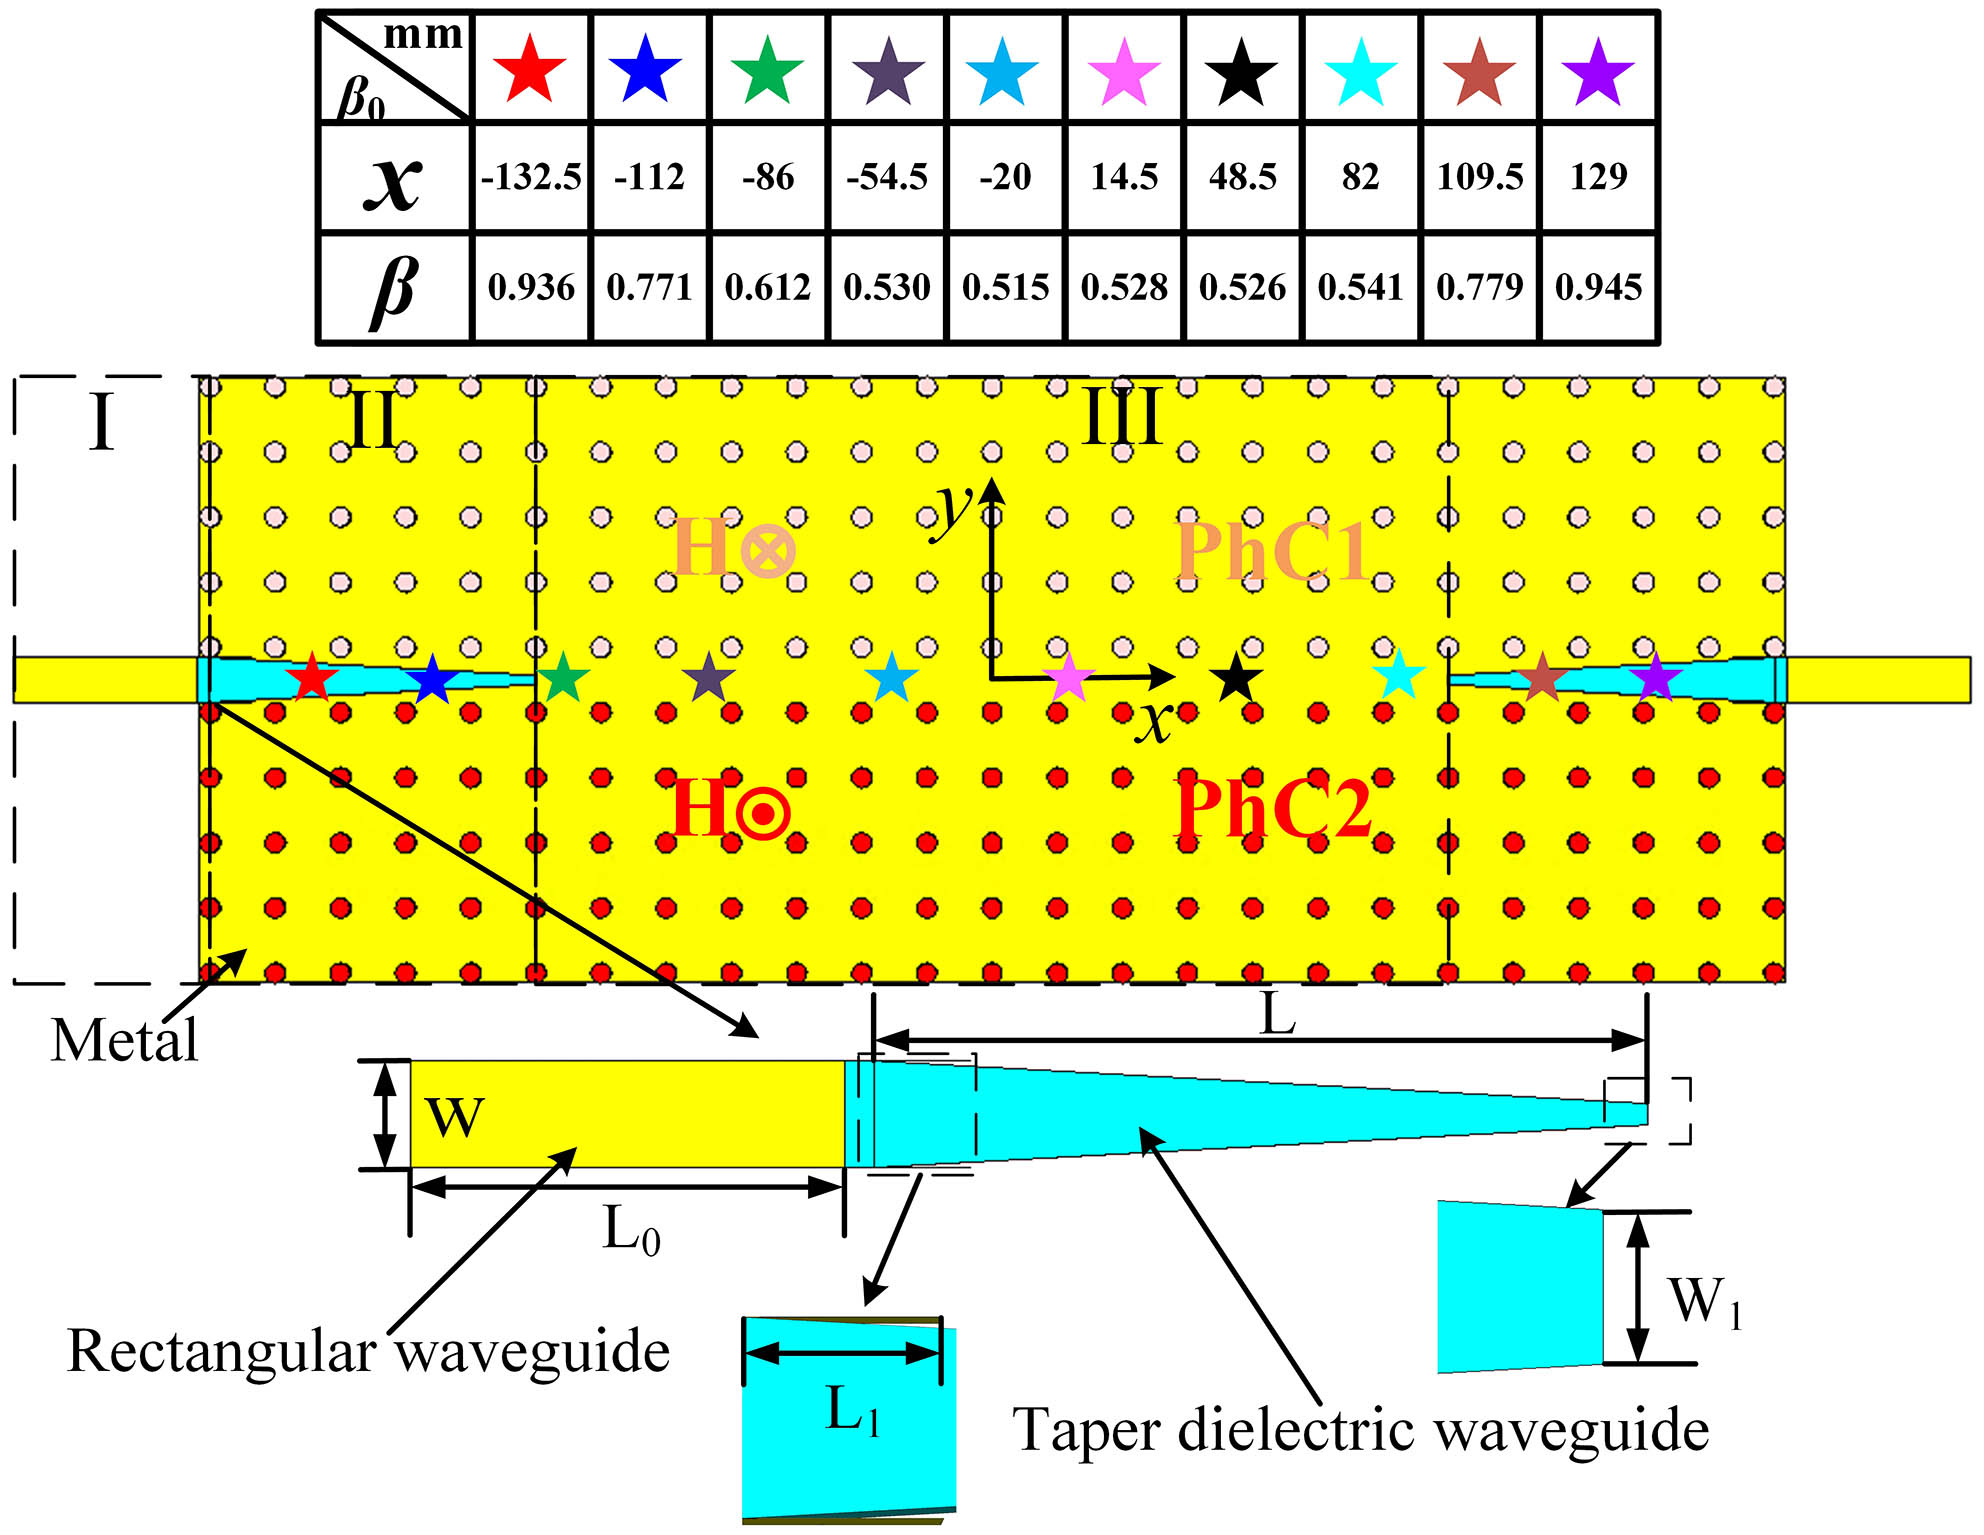 Configuration of the waveguide system composed of the classical waveguide, transition waveguide, and topological waveguide. Region I is a conventional rectangular waveguide. Region II is a taper dielectric waveguide with partial metal cover. Region III is a topological waveguide channel formed by the domain wall of PhC1 and PhC2. The pentagram with different colors represents the β points corresponding to different positions x.